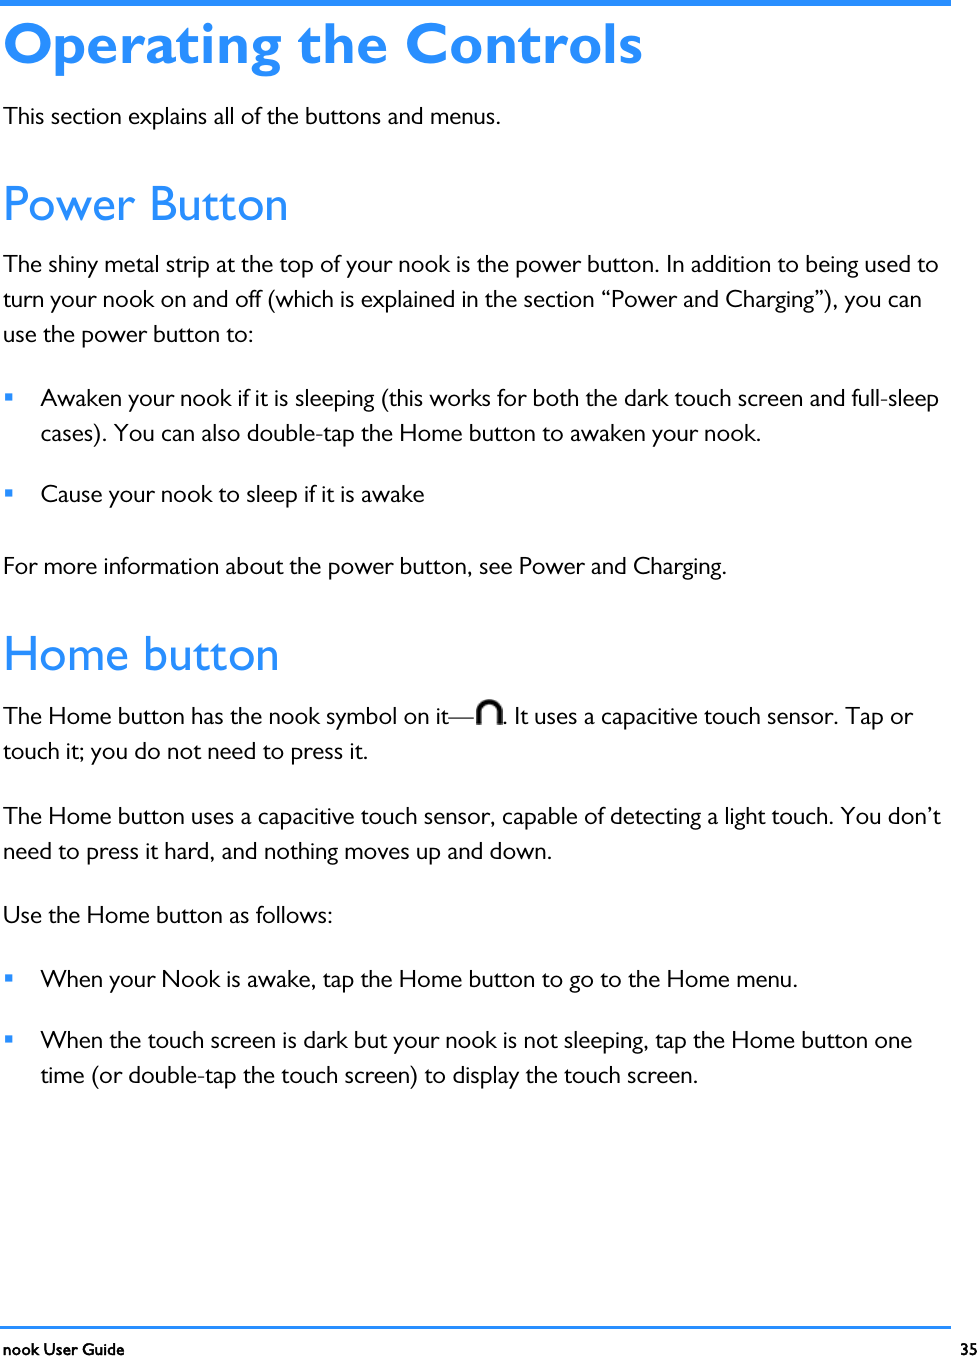  nook User Guide    35        Operating the Controls This section explains all of the buttons and menus. Power Button The shiny metal strip at the top of your nook is the power button. In addition to being used to turn your nook on and off (which is explained in the section “Power and Charging”), you can use the power button to:  Awaken your nook if it is sleeping (this works for both the dark touch screen and full-sleep cases). You can also double-tap the Home button to awaken your nook.  Cause your nook to sleep if it is awake For more information about the power button, see Power and Charging. Home button The Home button has the nook symbol on it— . It uses a capacitive touch sensor. Tap or touch it; you do not need to press it. The Home button uses a capacitive touch sensor, capable of detecting a light touch. You don’t need to press it hard, and nothing moves up and down. Use the Home button as follows:  When your Nook is awake, tap the Home button to go to the Home menu.  When the touch screen is dark but your nook is not sleeping, tap the Home button one time (or double-tap the touch screen) to display the touch screen. 